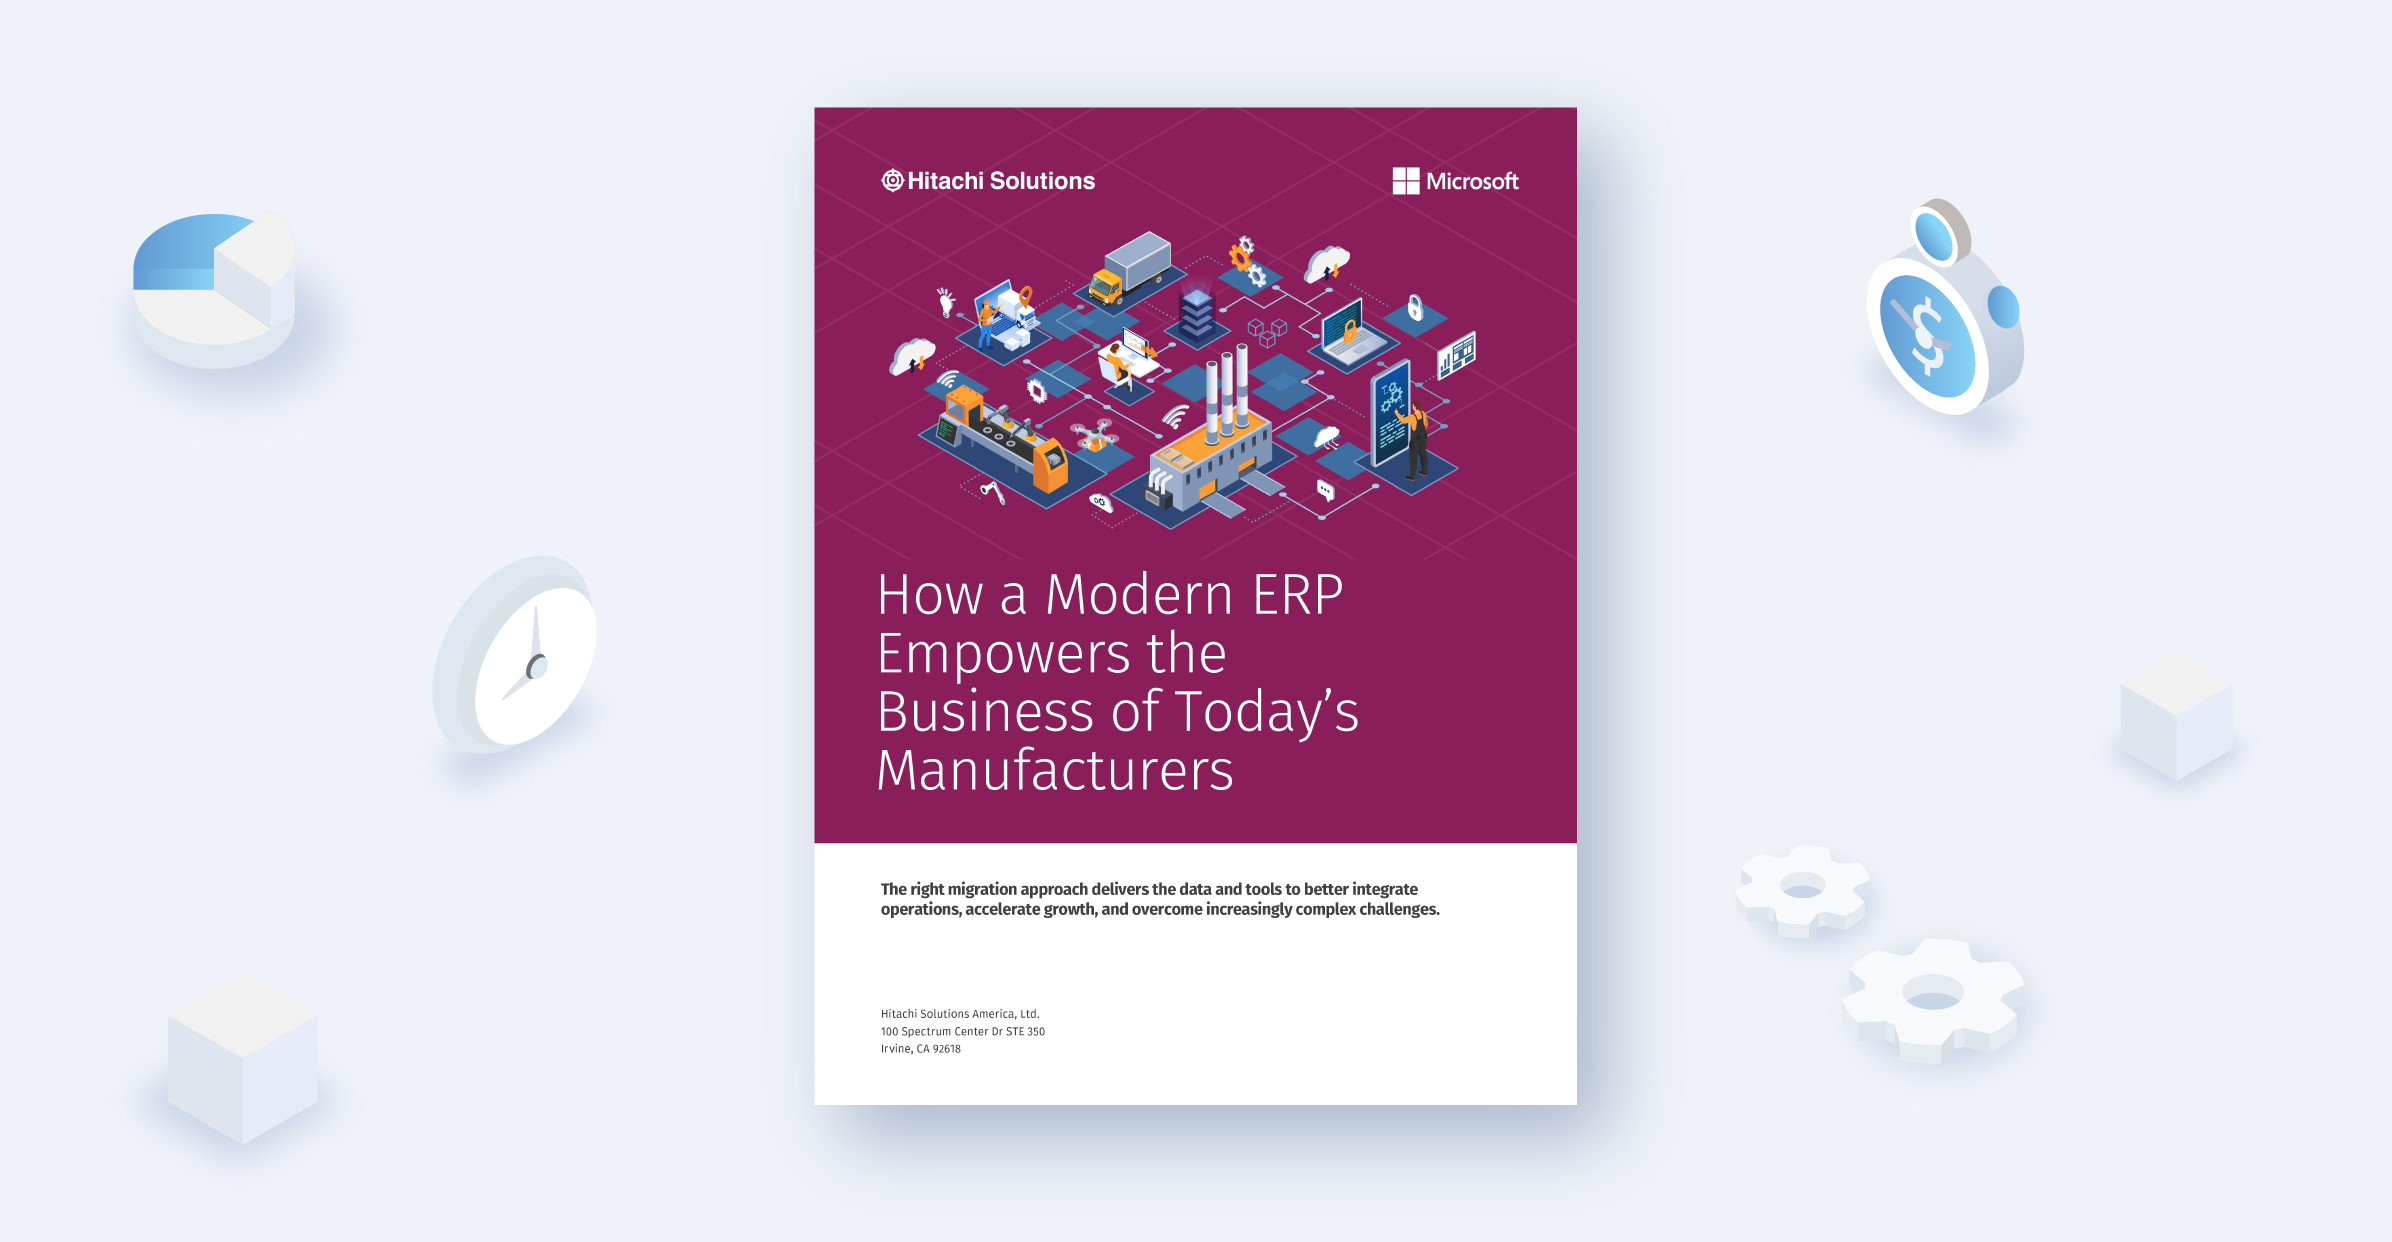 How a Modern ERP Empowers the Business of Today’s Manufacturers